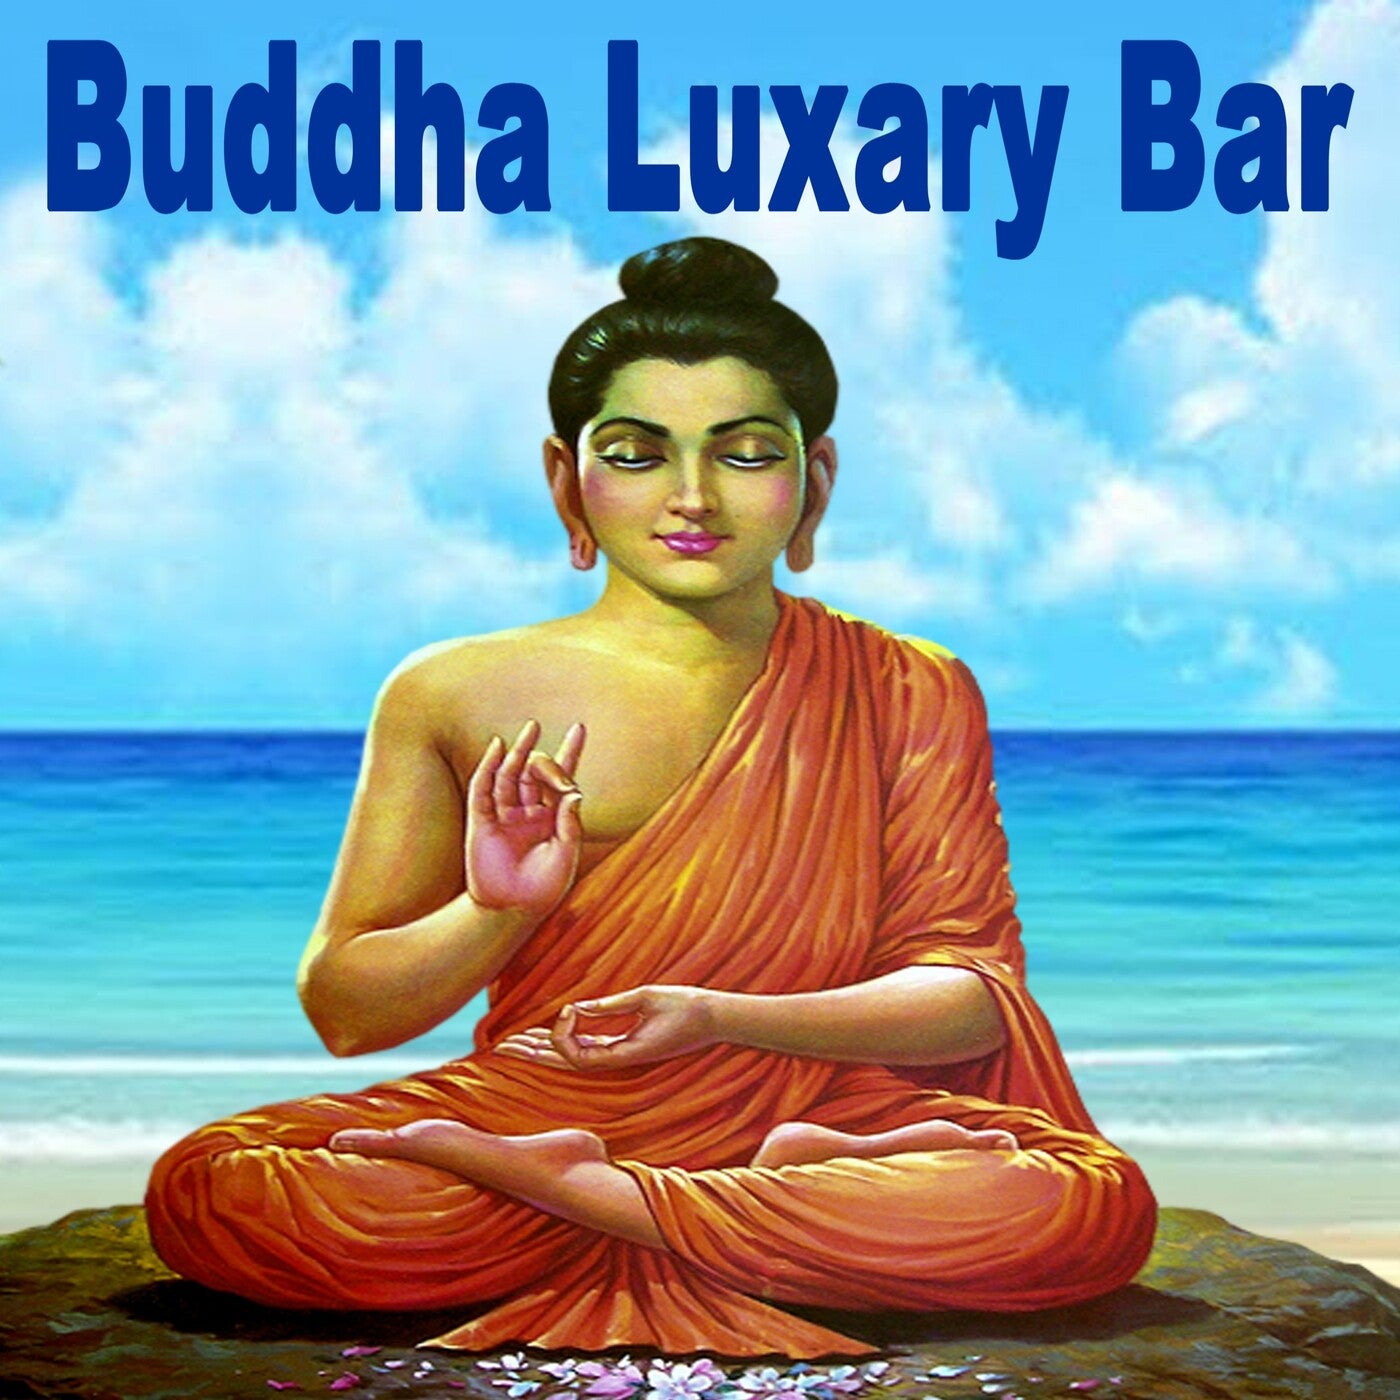 Buddha Luxary Bar - The Ibiza Chillout Summer Mix 2021 (The Best Selection of Buddha Luxury Bar Chillout Melodies. Relaxing Deep Sounds for Chilling)